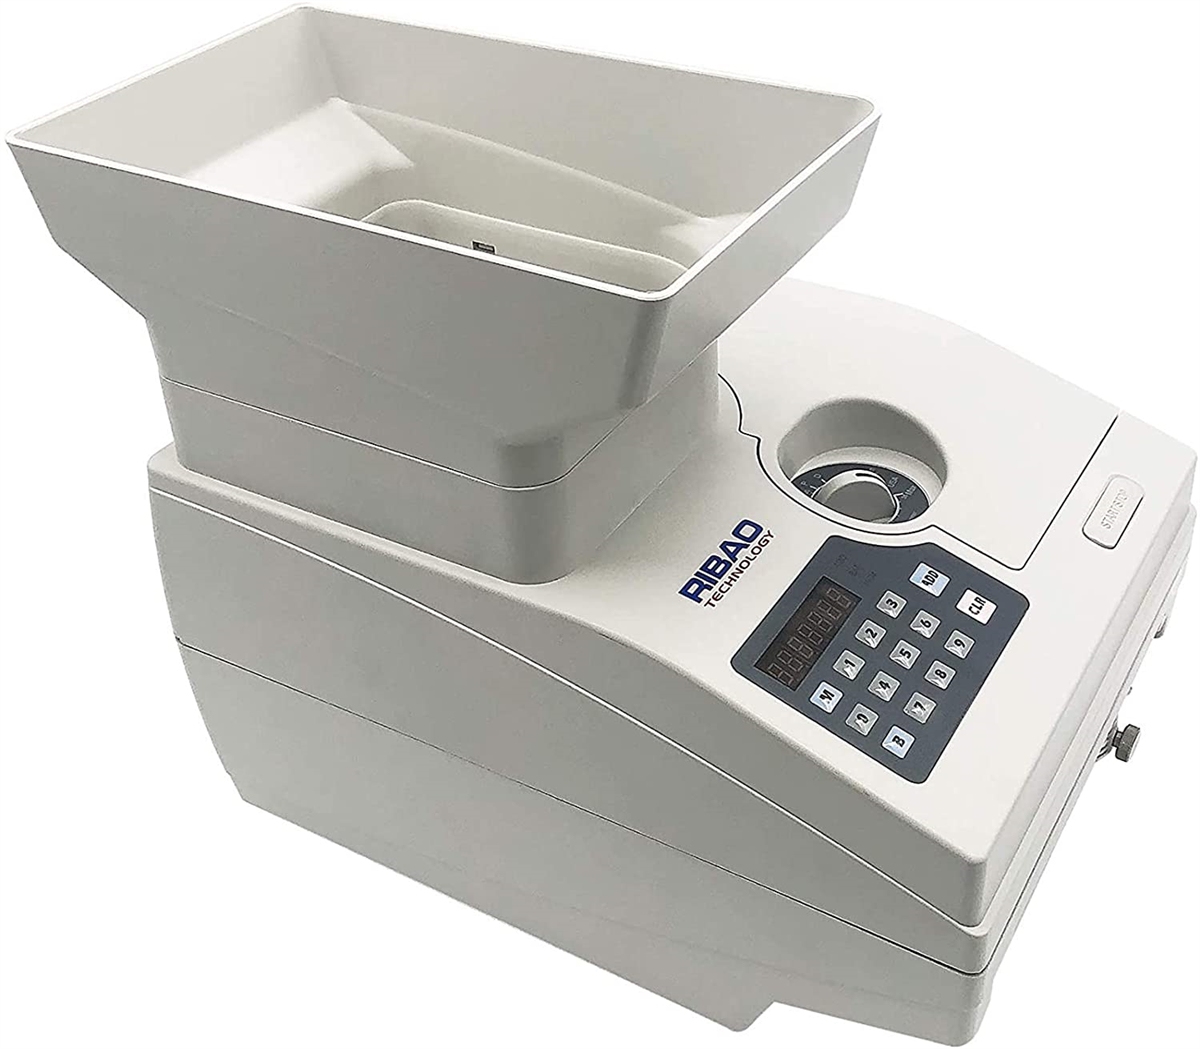  Ribao HCS-3300 High Speed Coin Counter, Heavy Duty Bank Grade  Coin Sorter with Large Hopper, Two-Year Warranty : Office Products